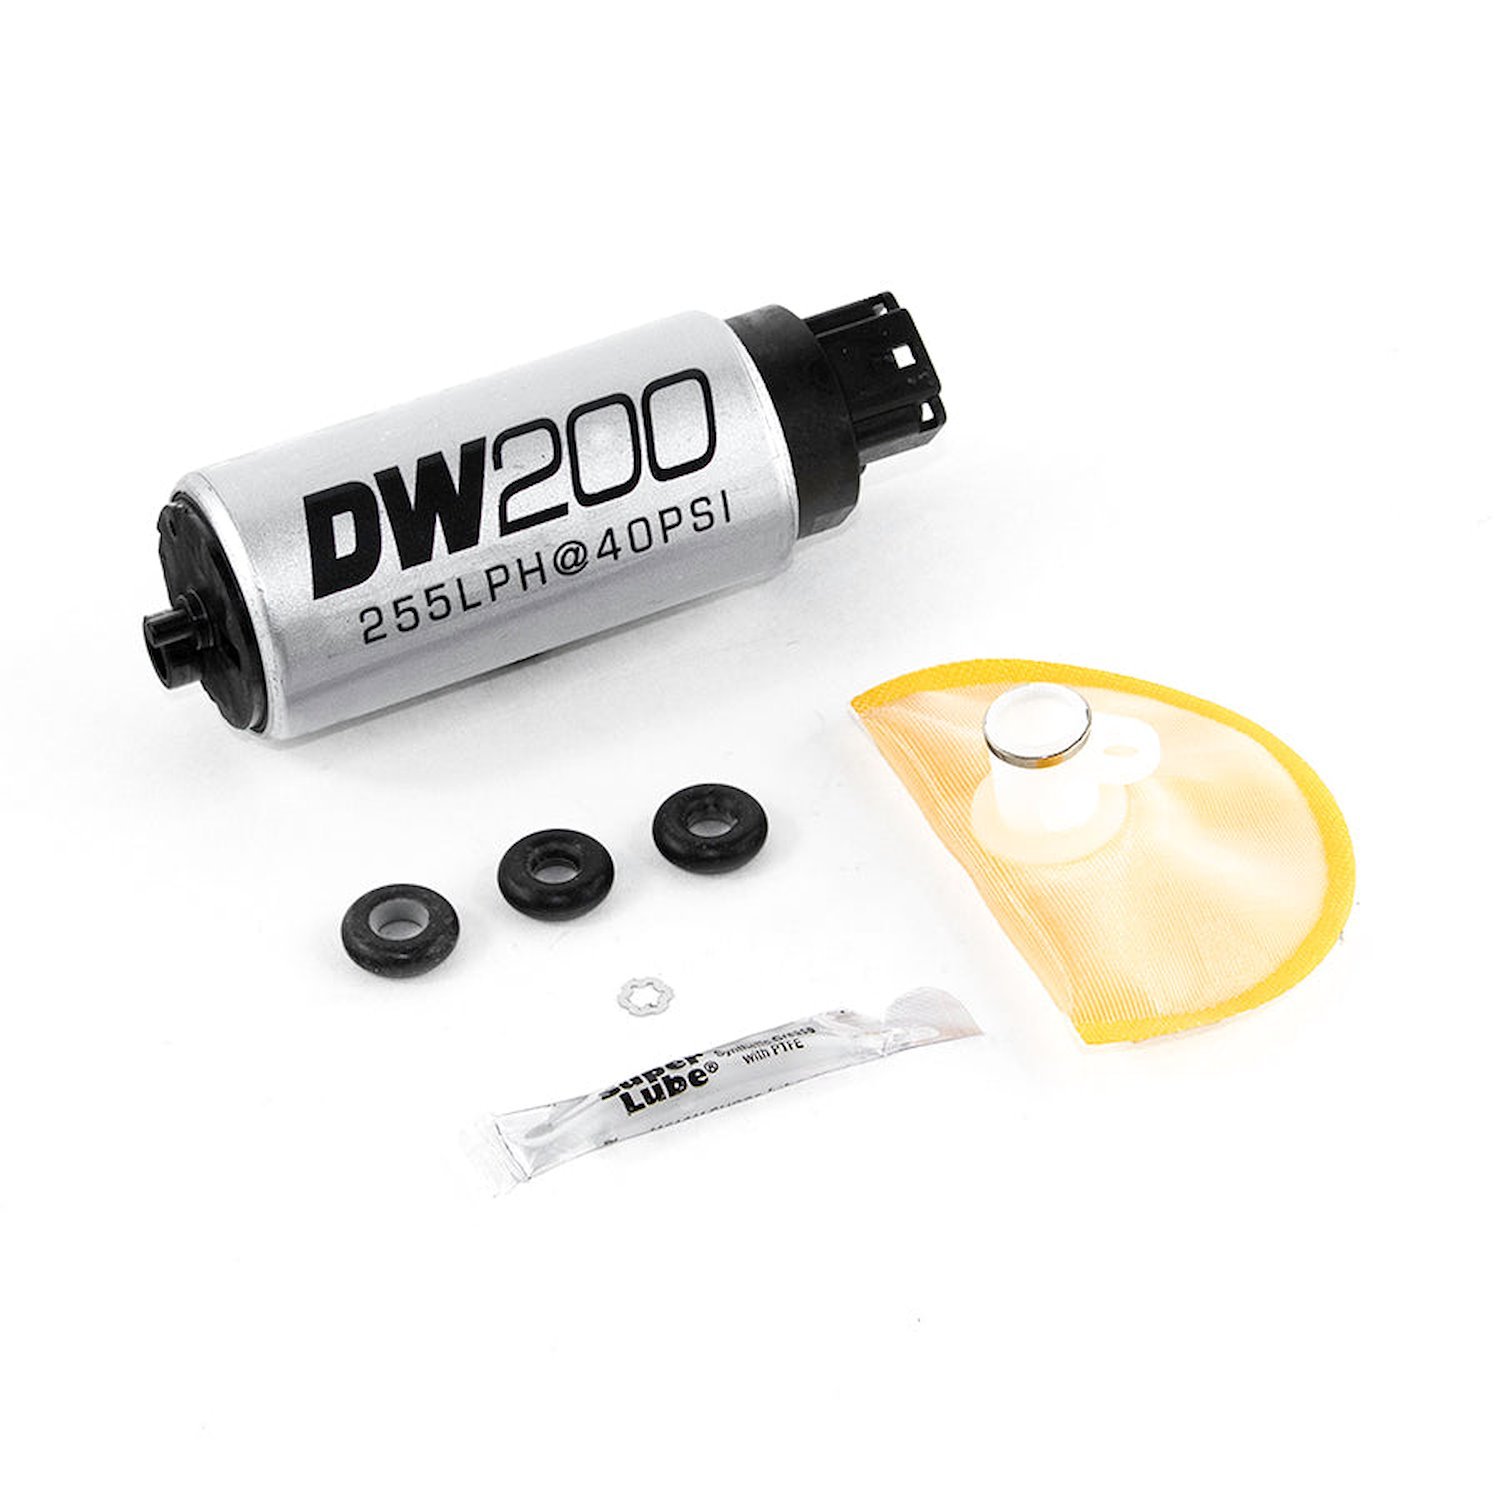 9201S1005 DW200 series 255lph in-tank fuel pump w/ install kit for G35 03-08 350z 03-08 and Legacy GT 2010+.